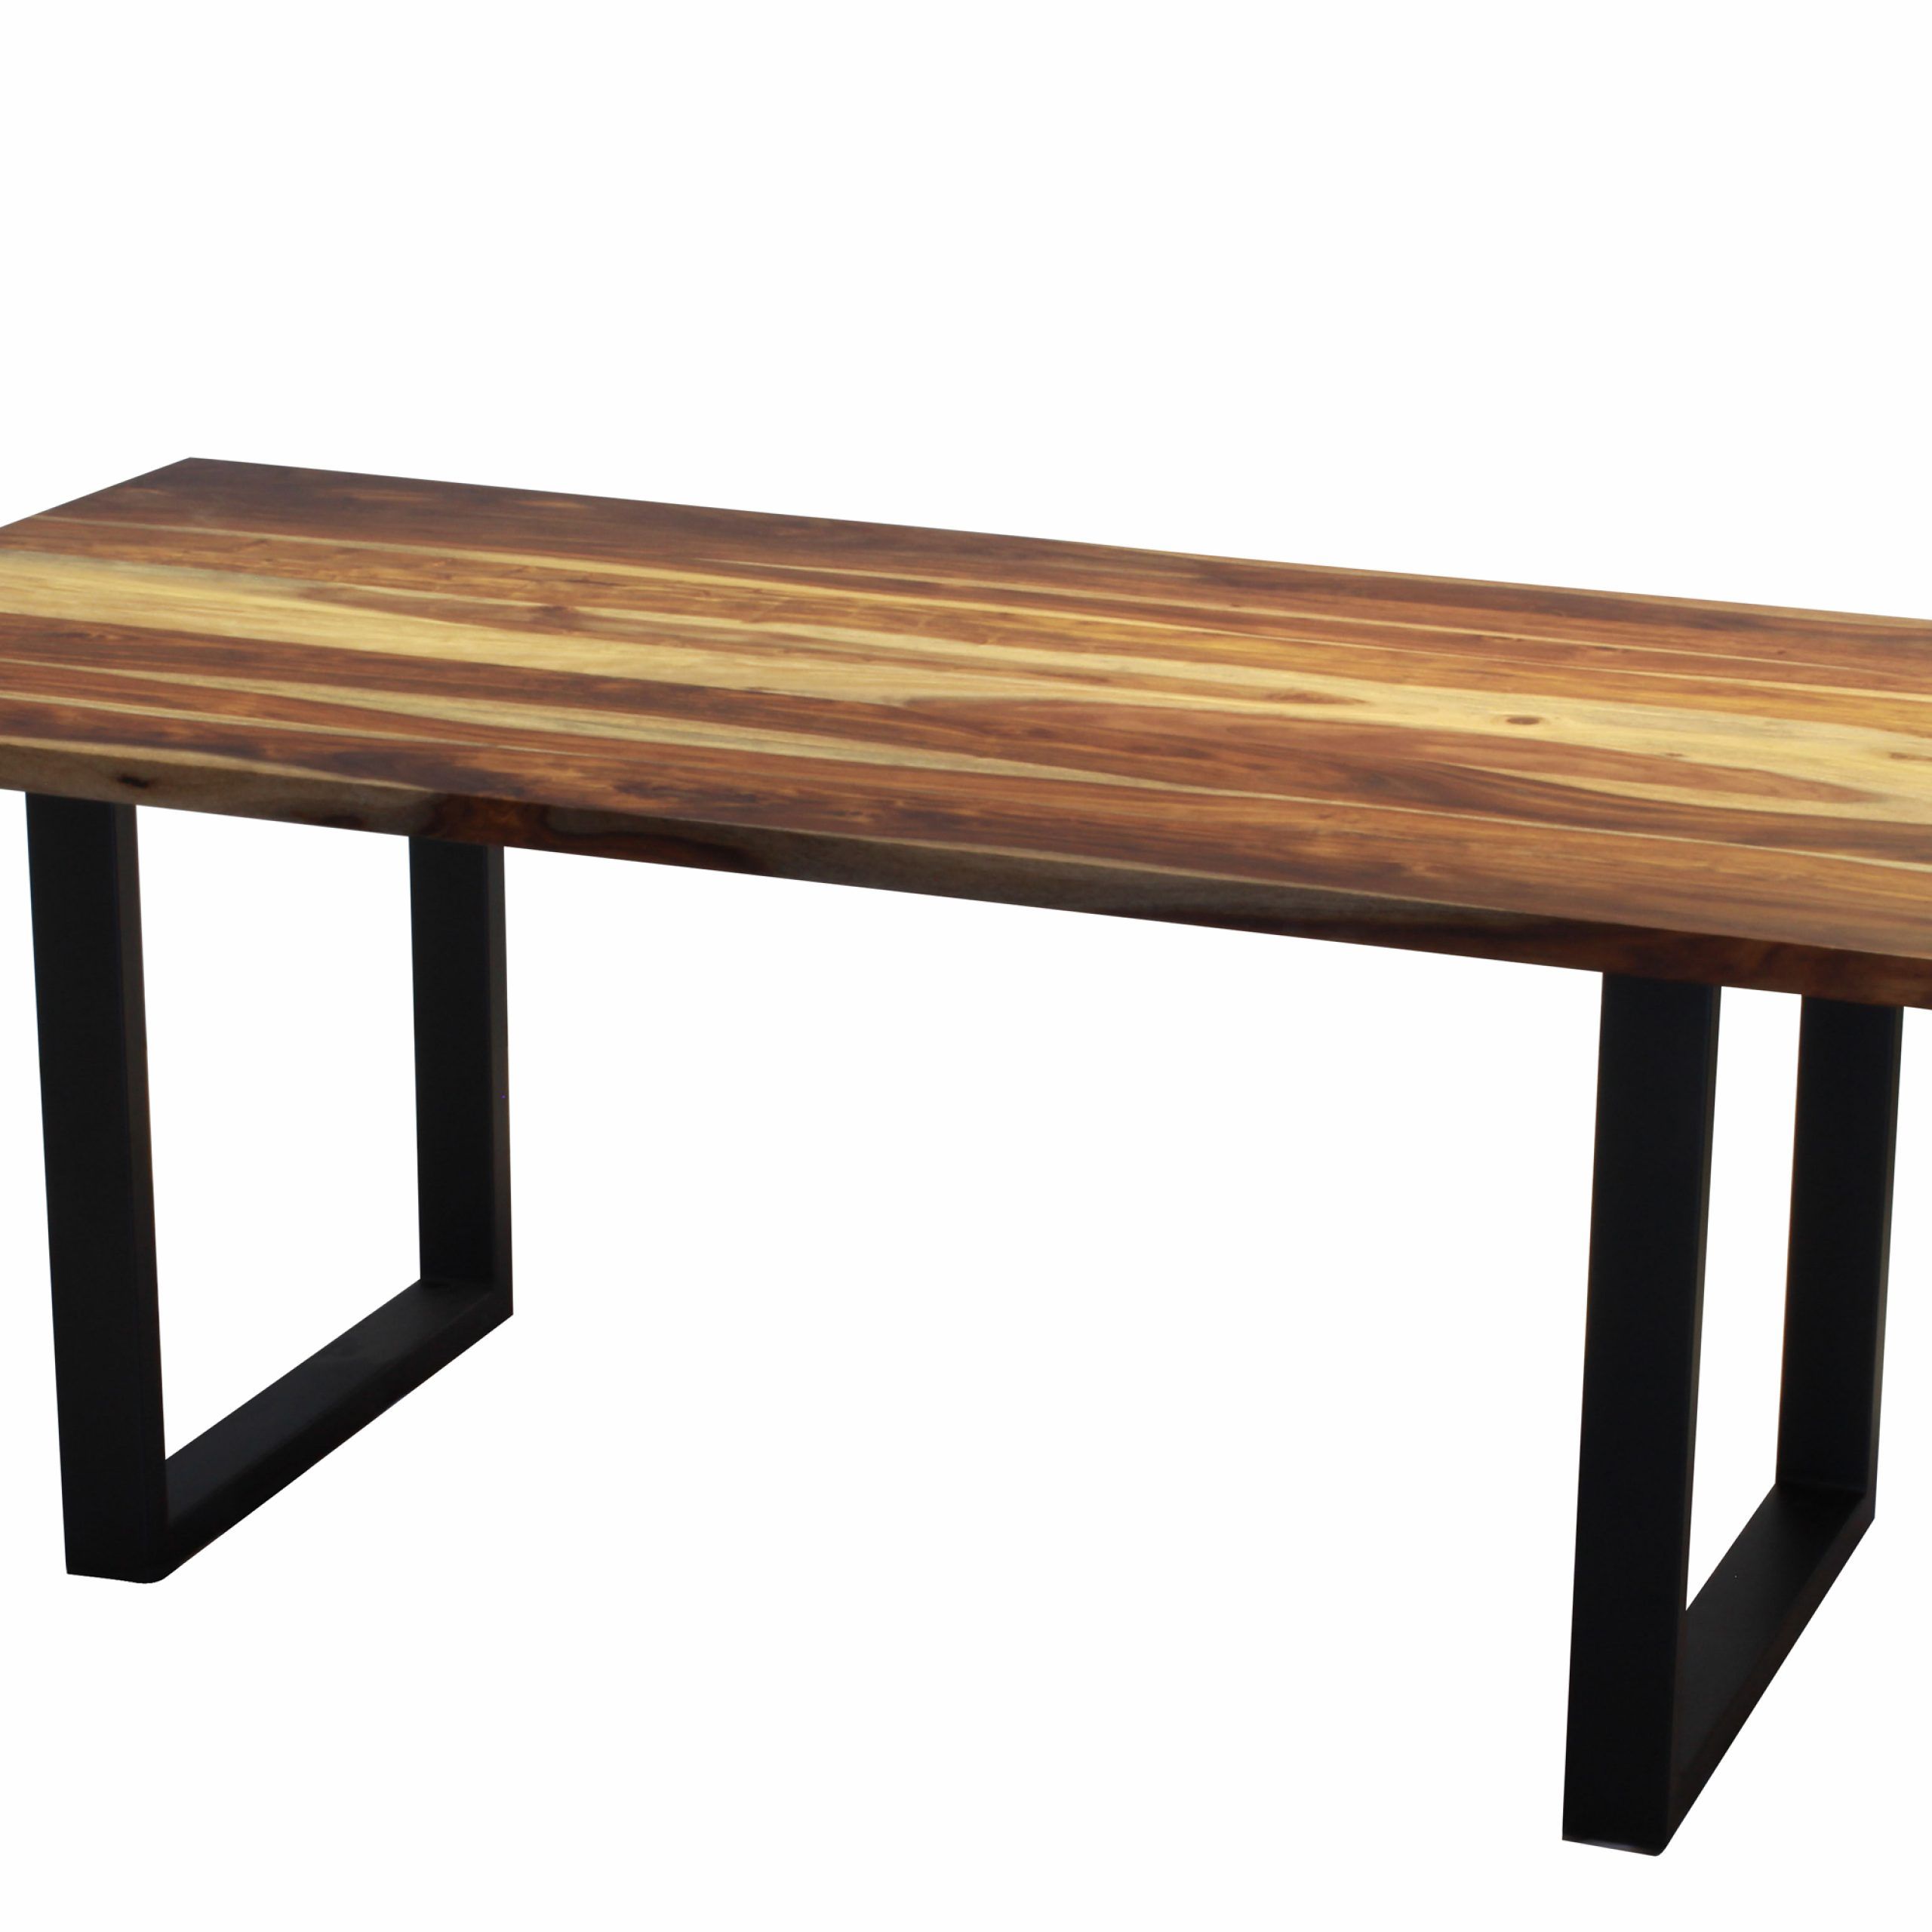 Most Recently Released Acacia Dining Tables With Black Rocket Legs Regarding Corcoran Acacia Live Edge Dining Table With Black Rocket Legs – 72" (Photo 4 of 25)